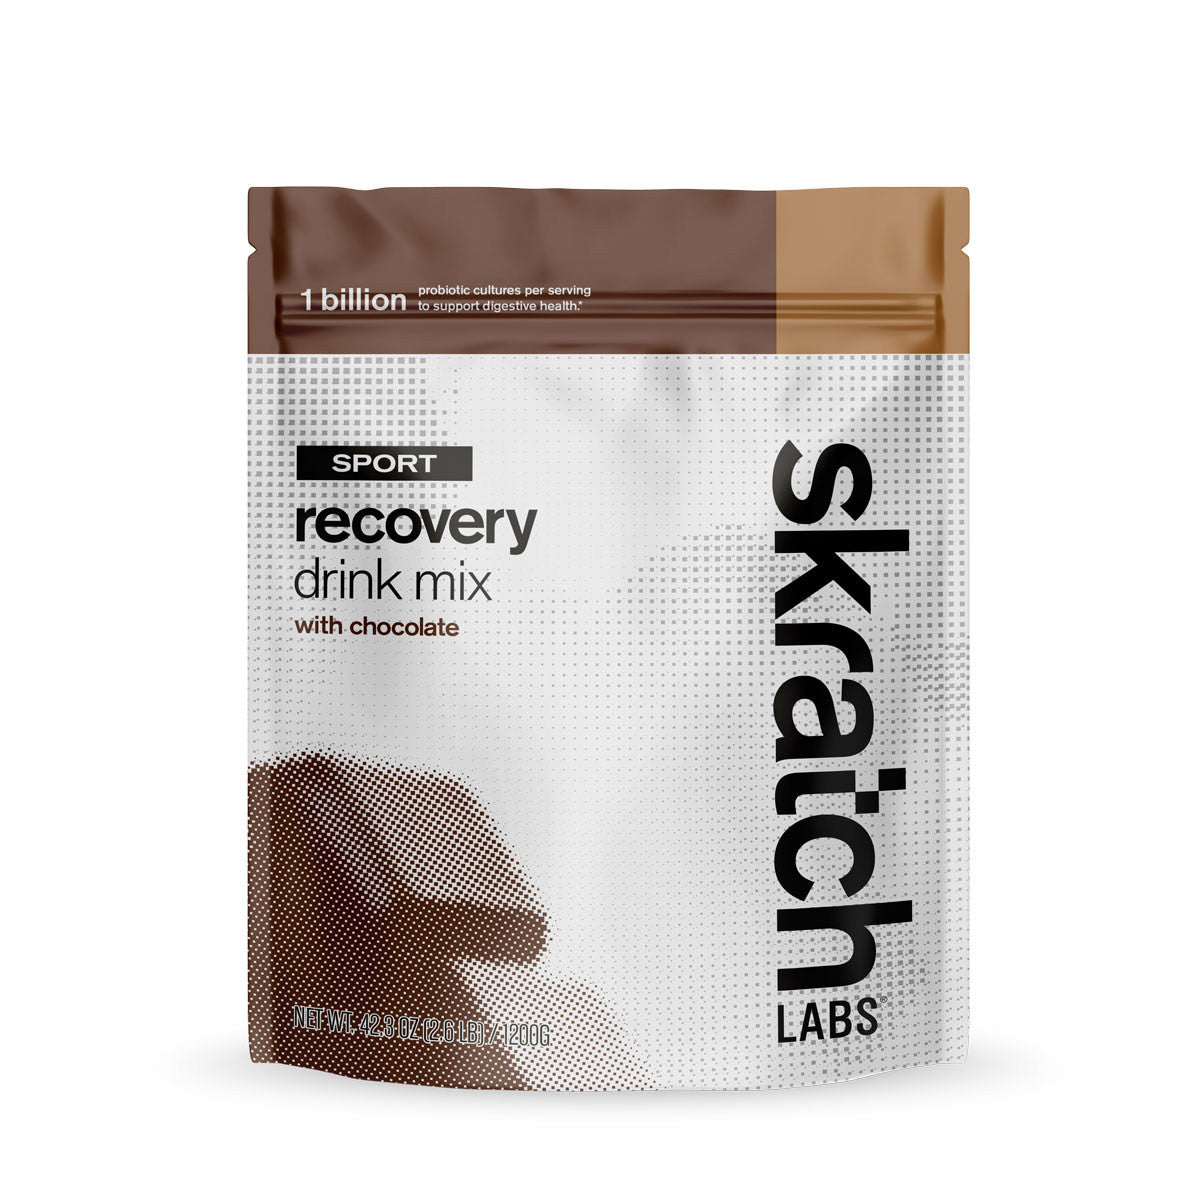 SKRATCH LABS Sport Recovery Drink Mix Bag